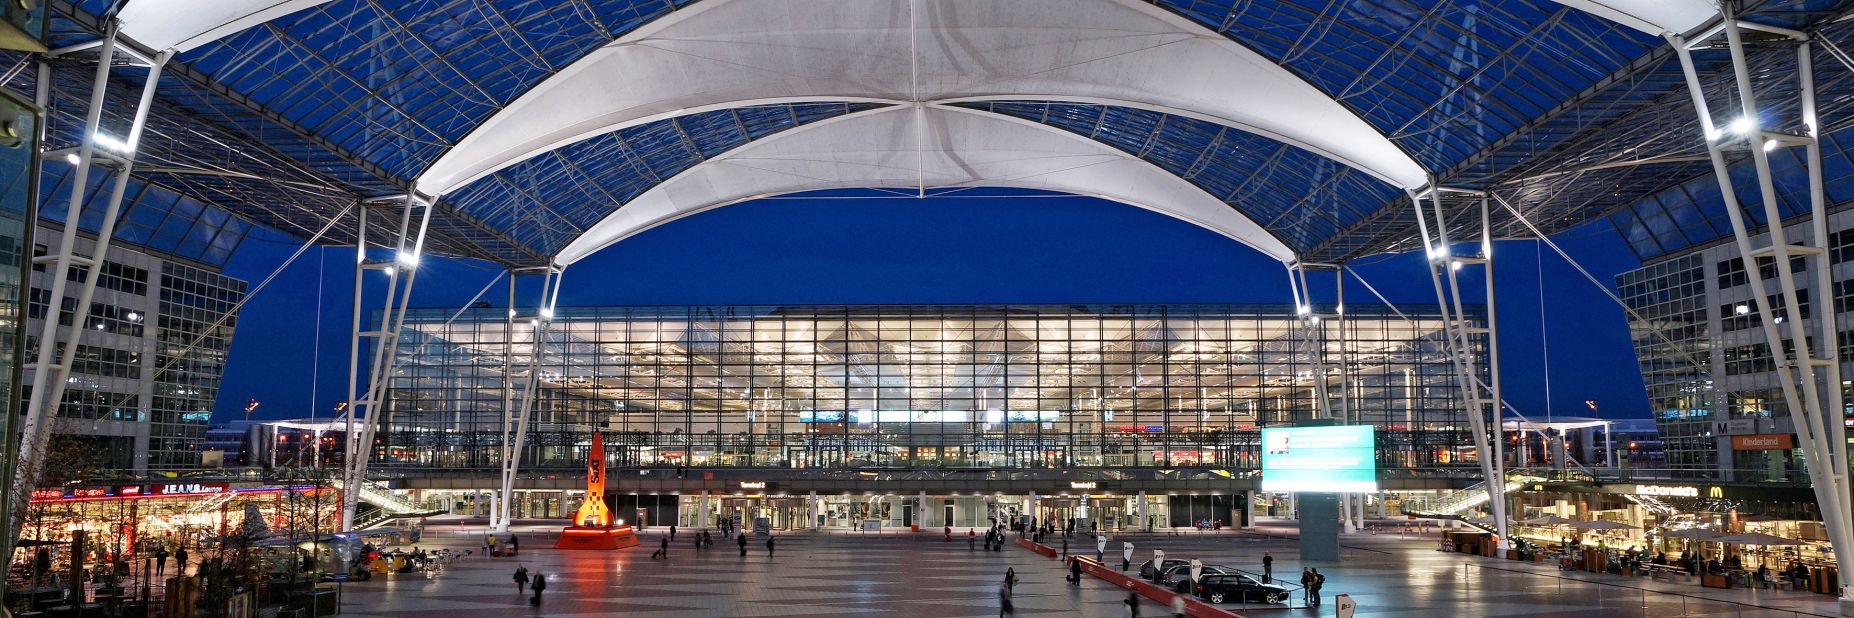 Germany's Munich Airport has retained its position as the world's No. 3 airport from previous years. 